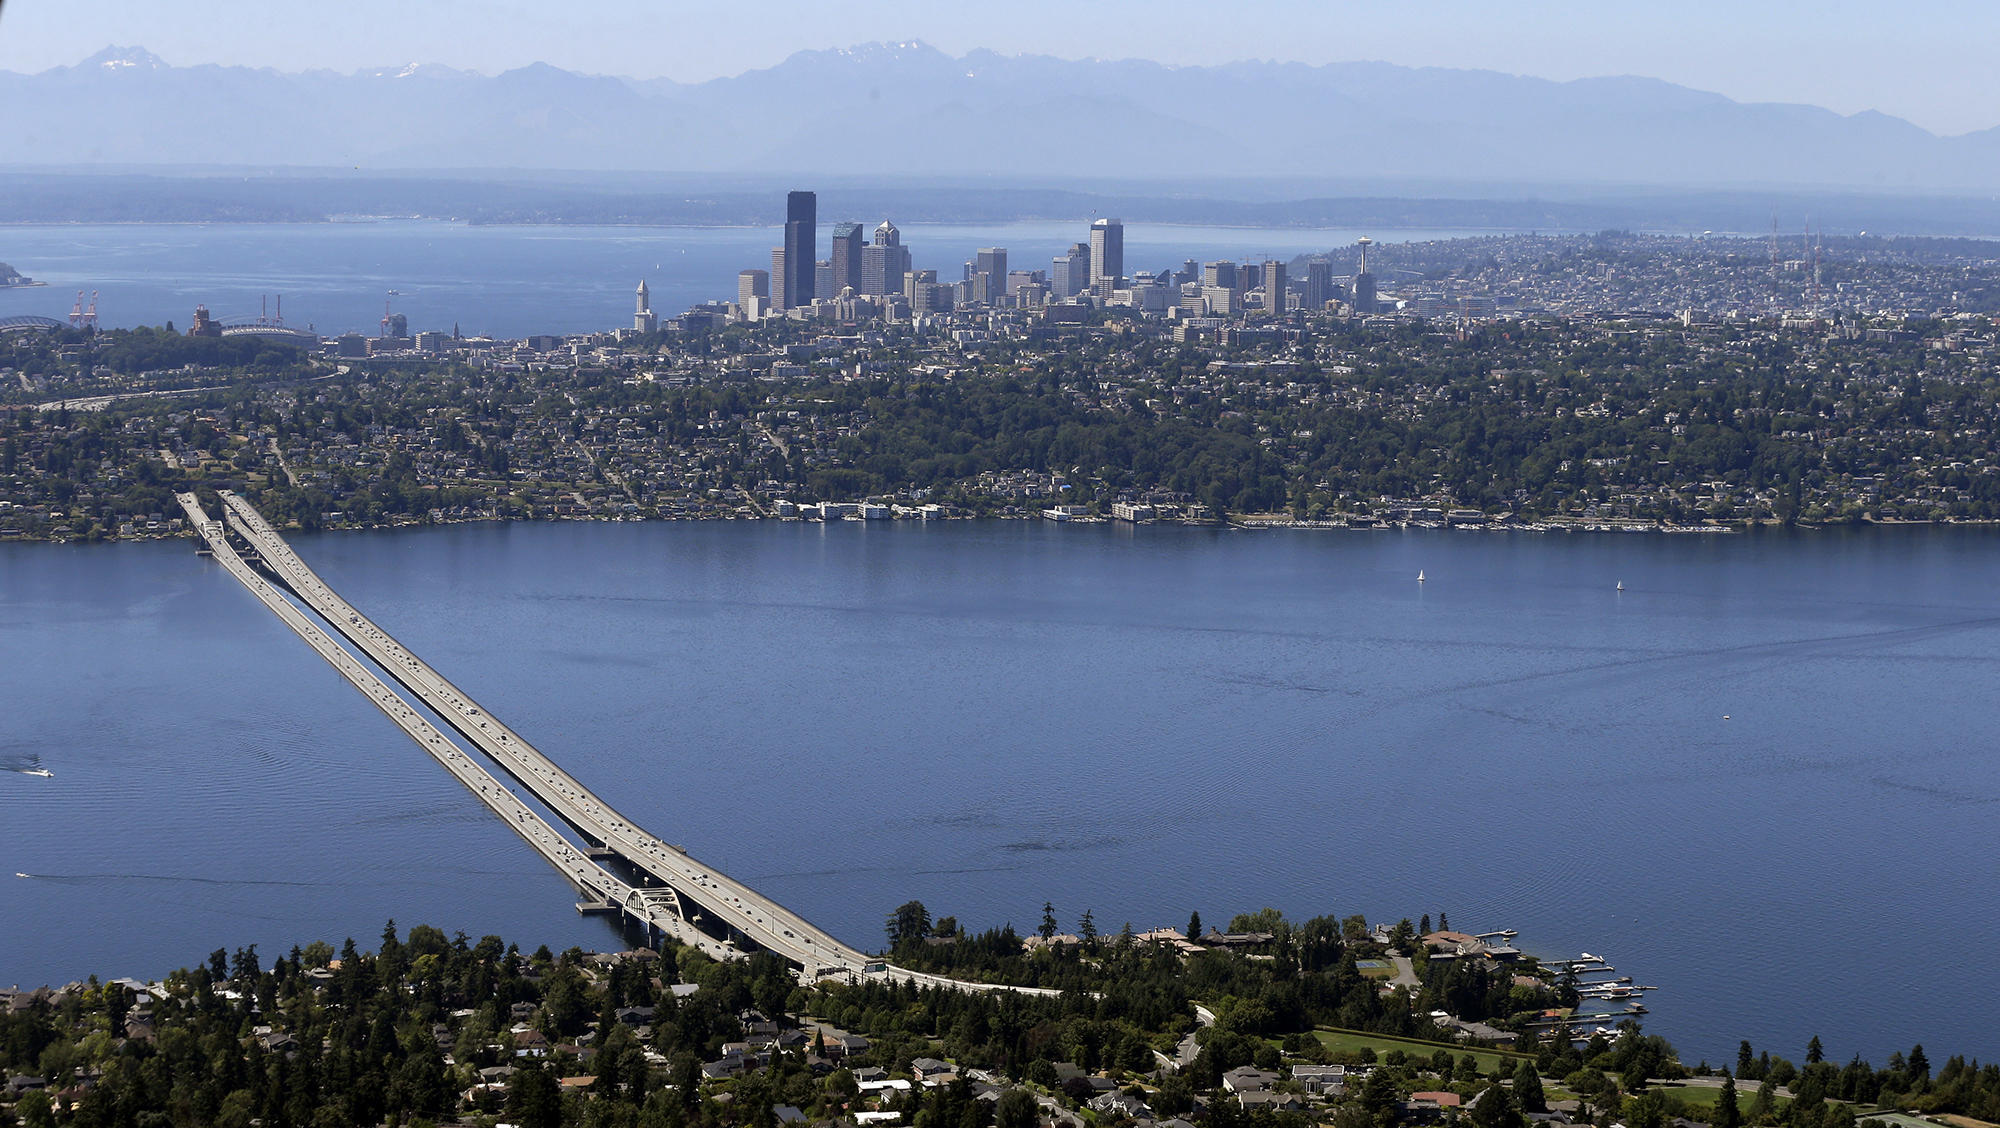 A view of Seattle from Mercer Island